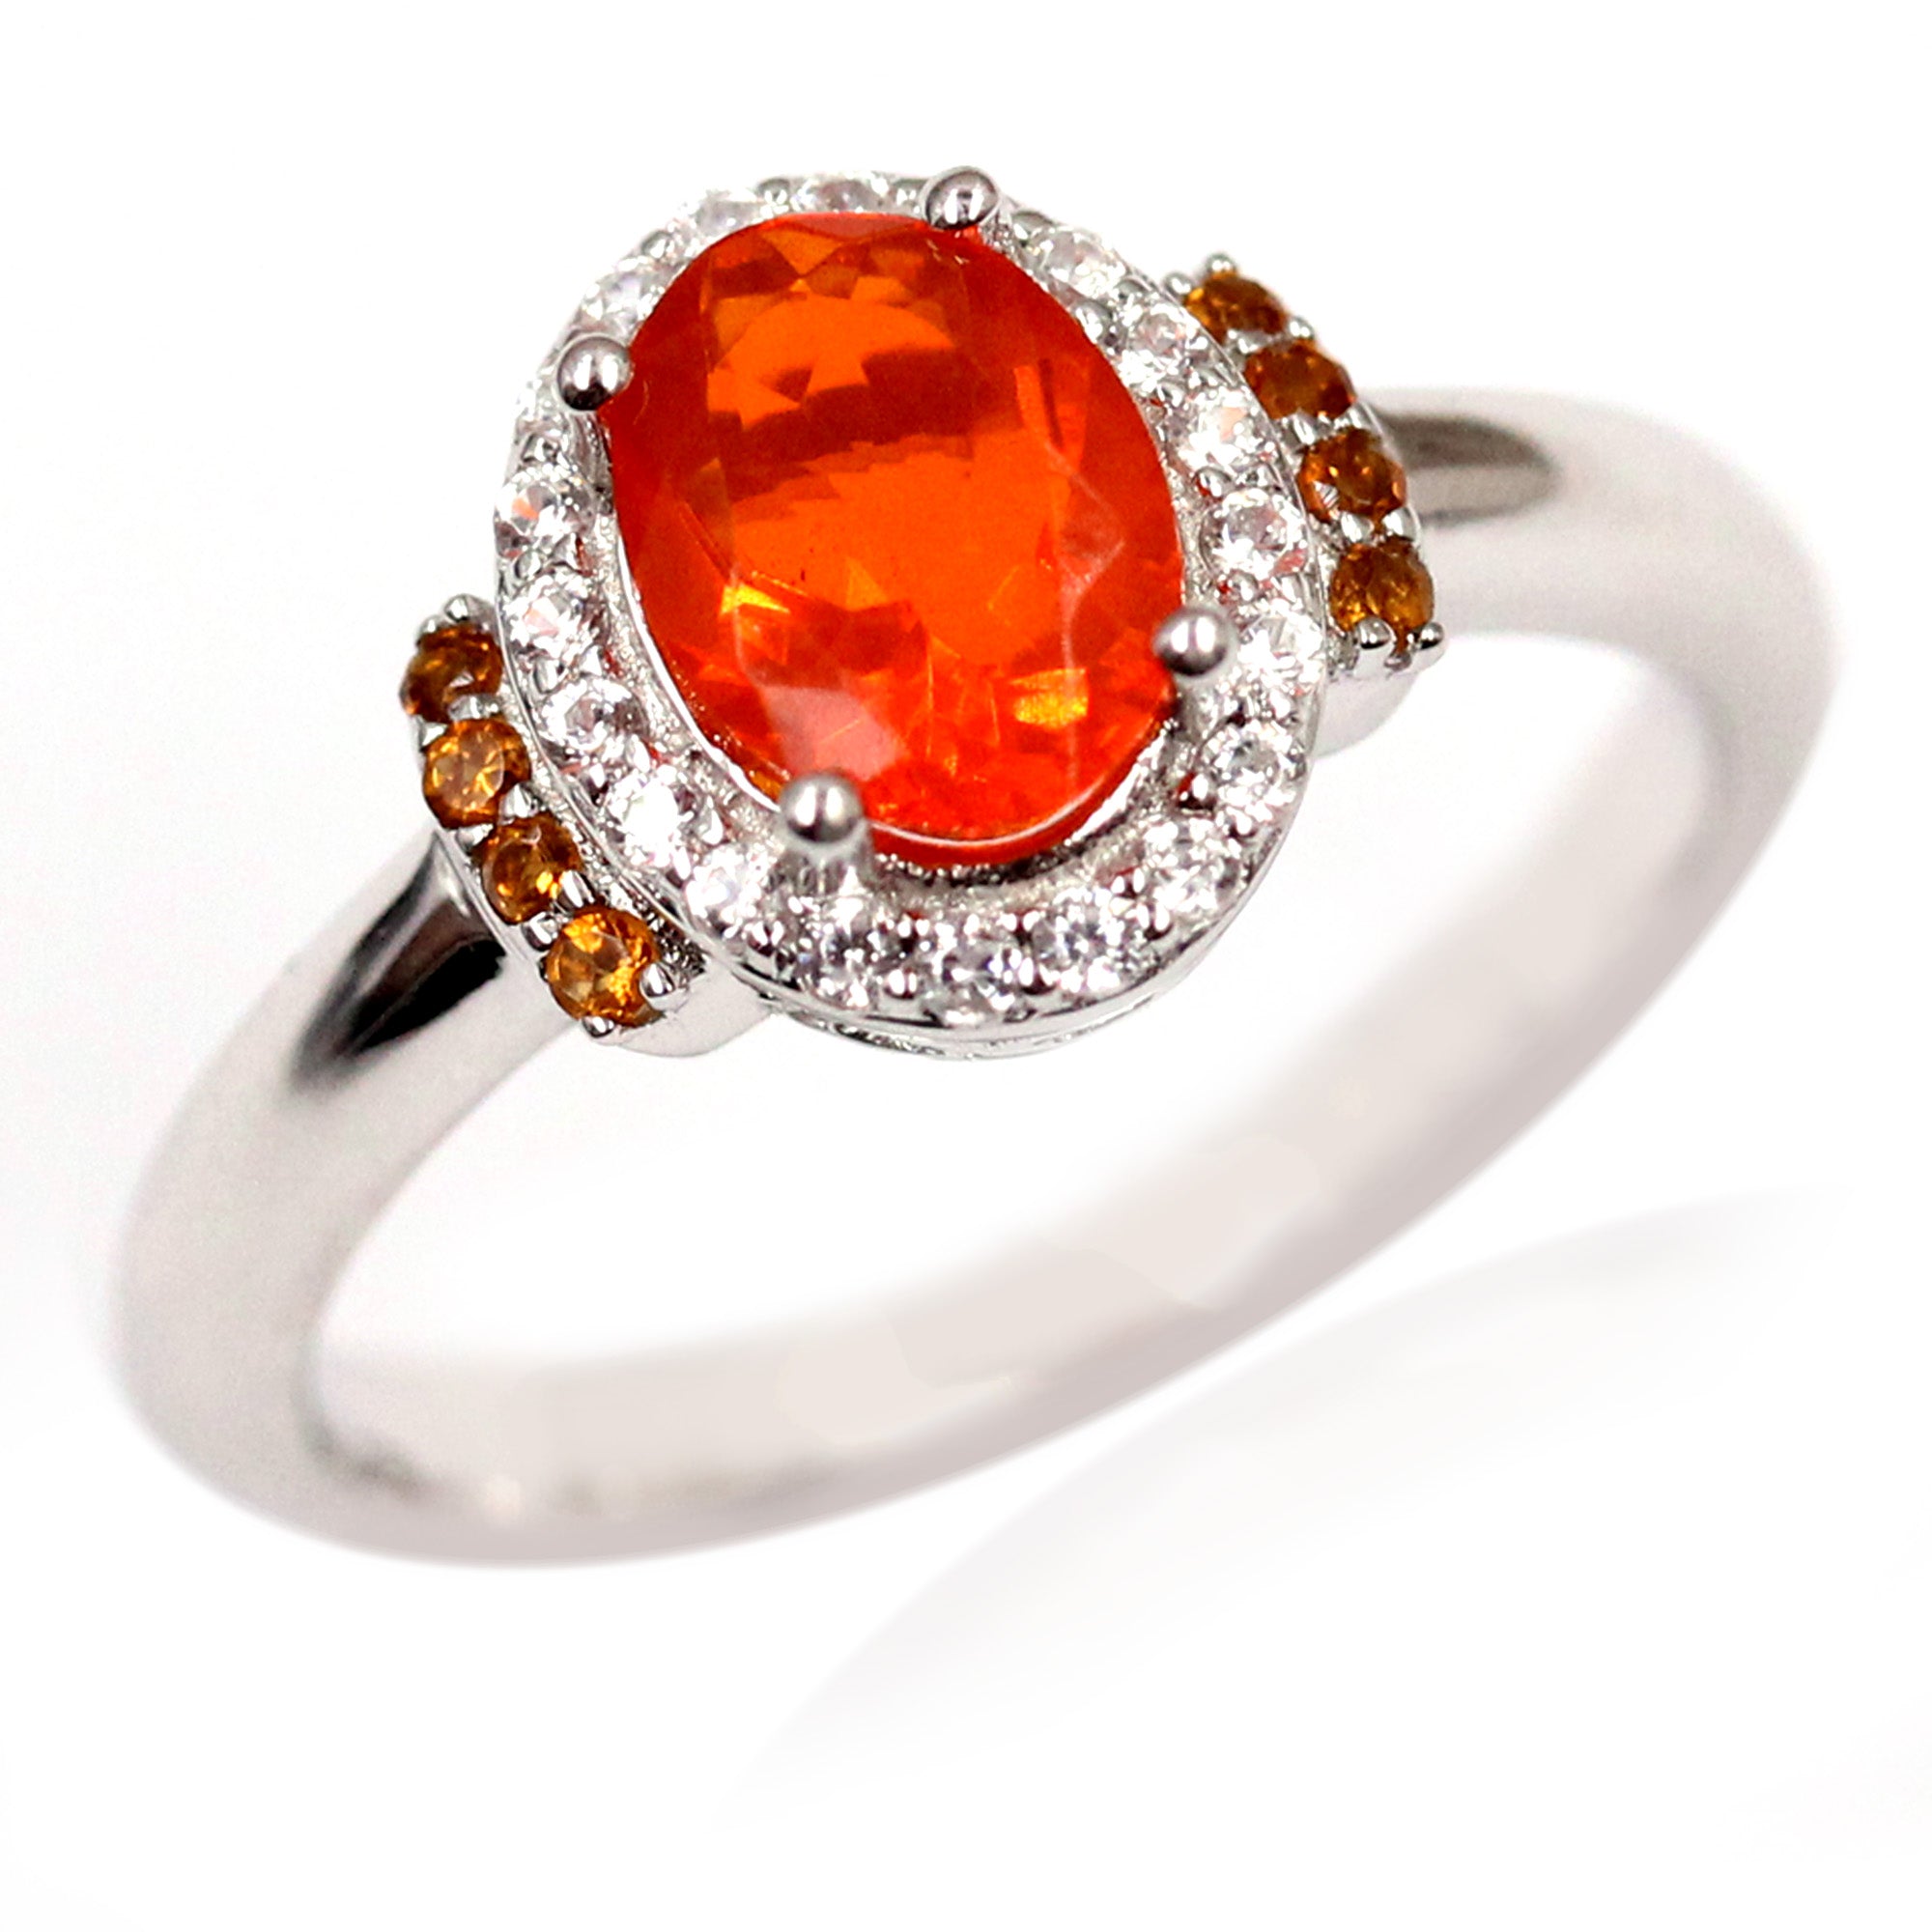 YULEM 925 Sterling Silver Natural Orange Fire Opal Ring Silver Engagement  Women Rings 7X7MM Orange Color - AliExpress